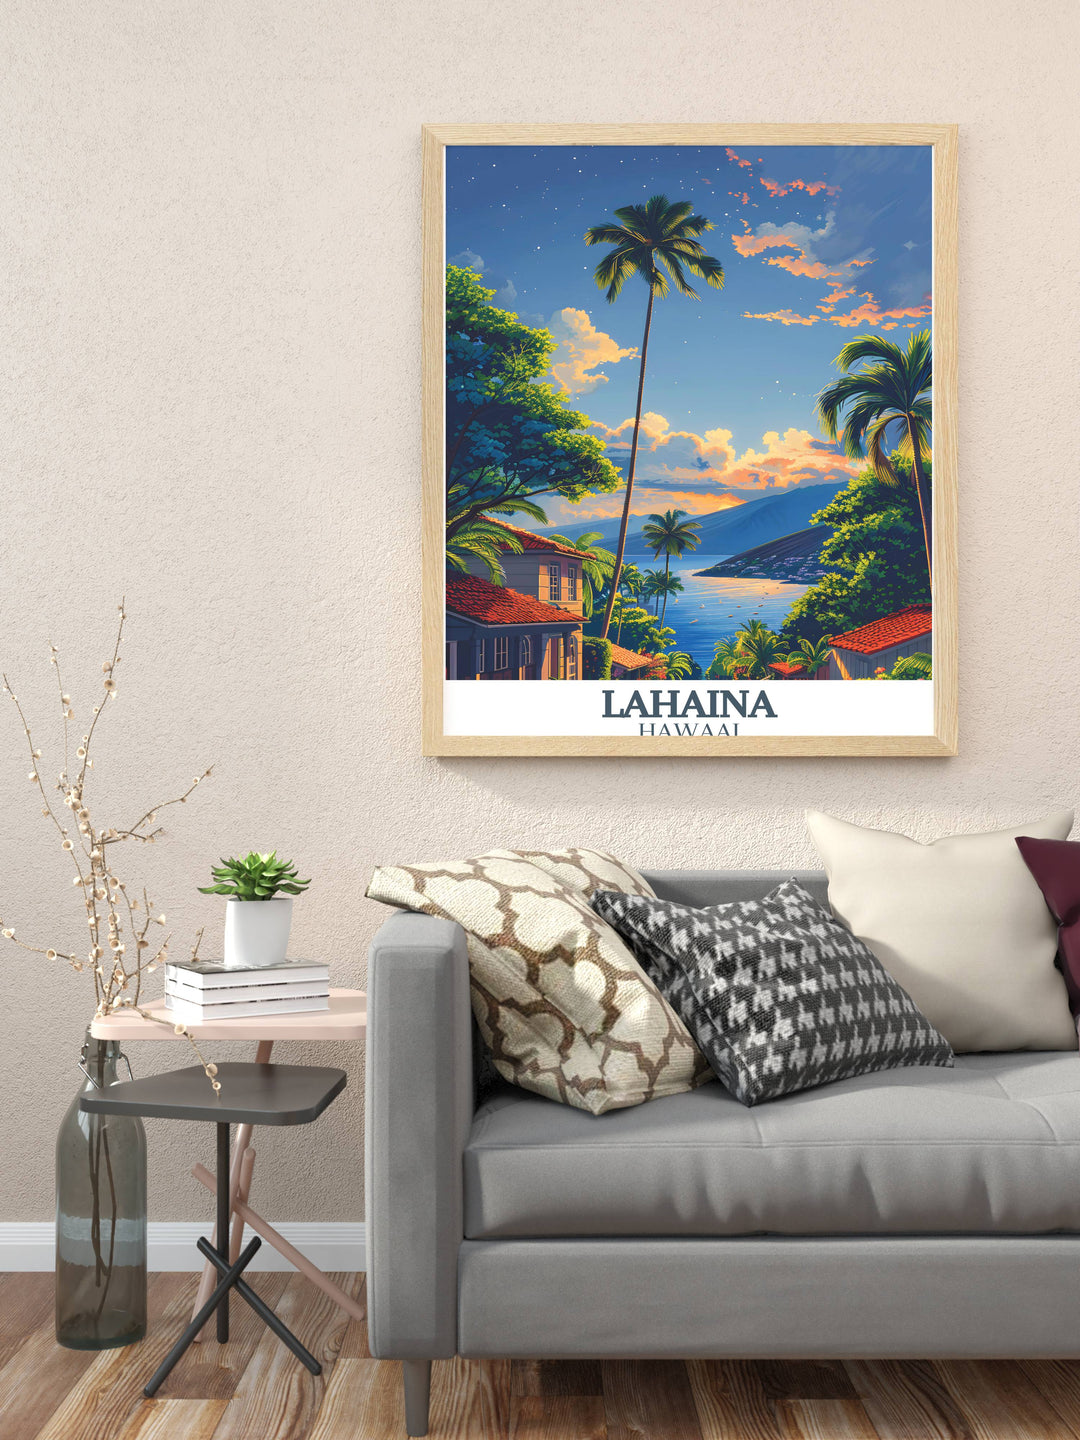 Detailed Lahaina Maui poster featuring an expansive view of the island, a great addition for those who cherish highly detailed and picturesque travel prints.